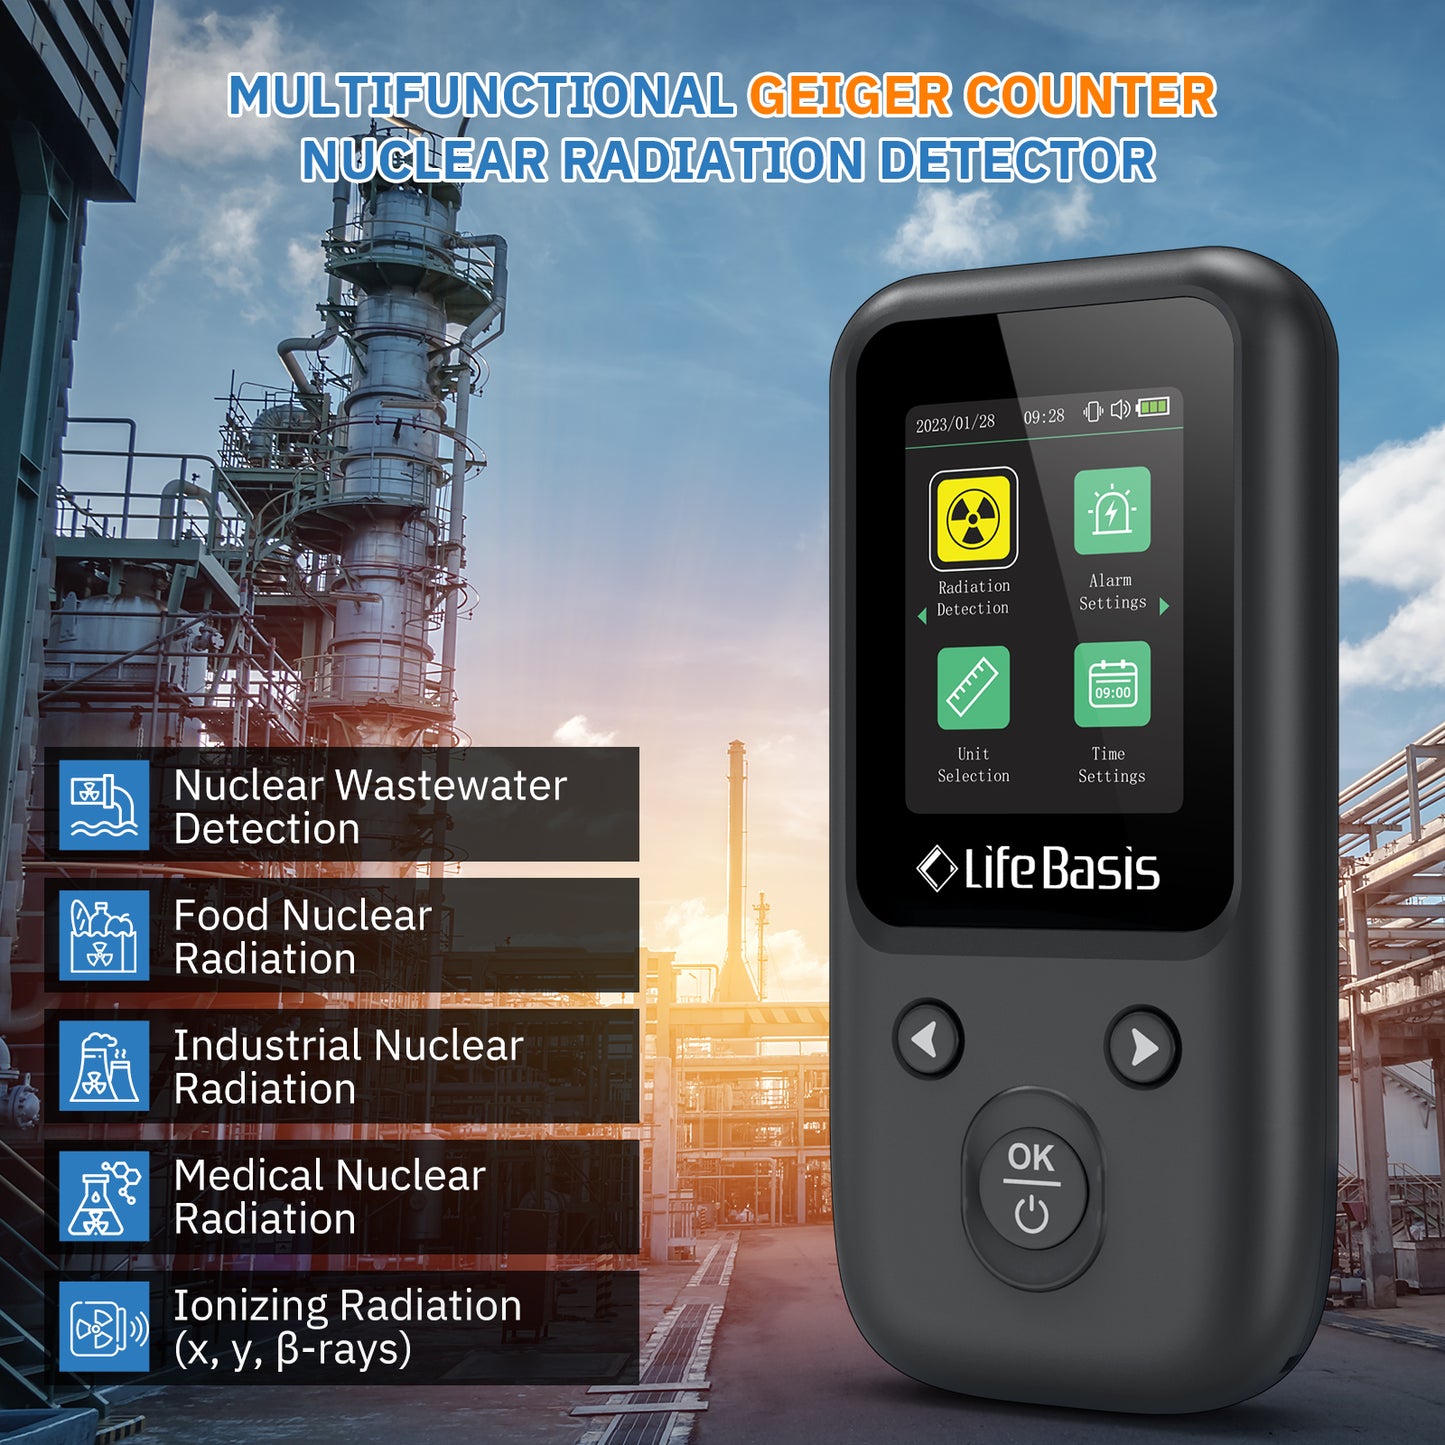 Life Basis Geiger Counter Nuclear Radiation Detector Beta Gamma X-ray Radiation Monitor with TFT Display and Smart Alert